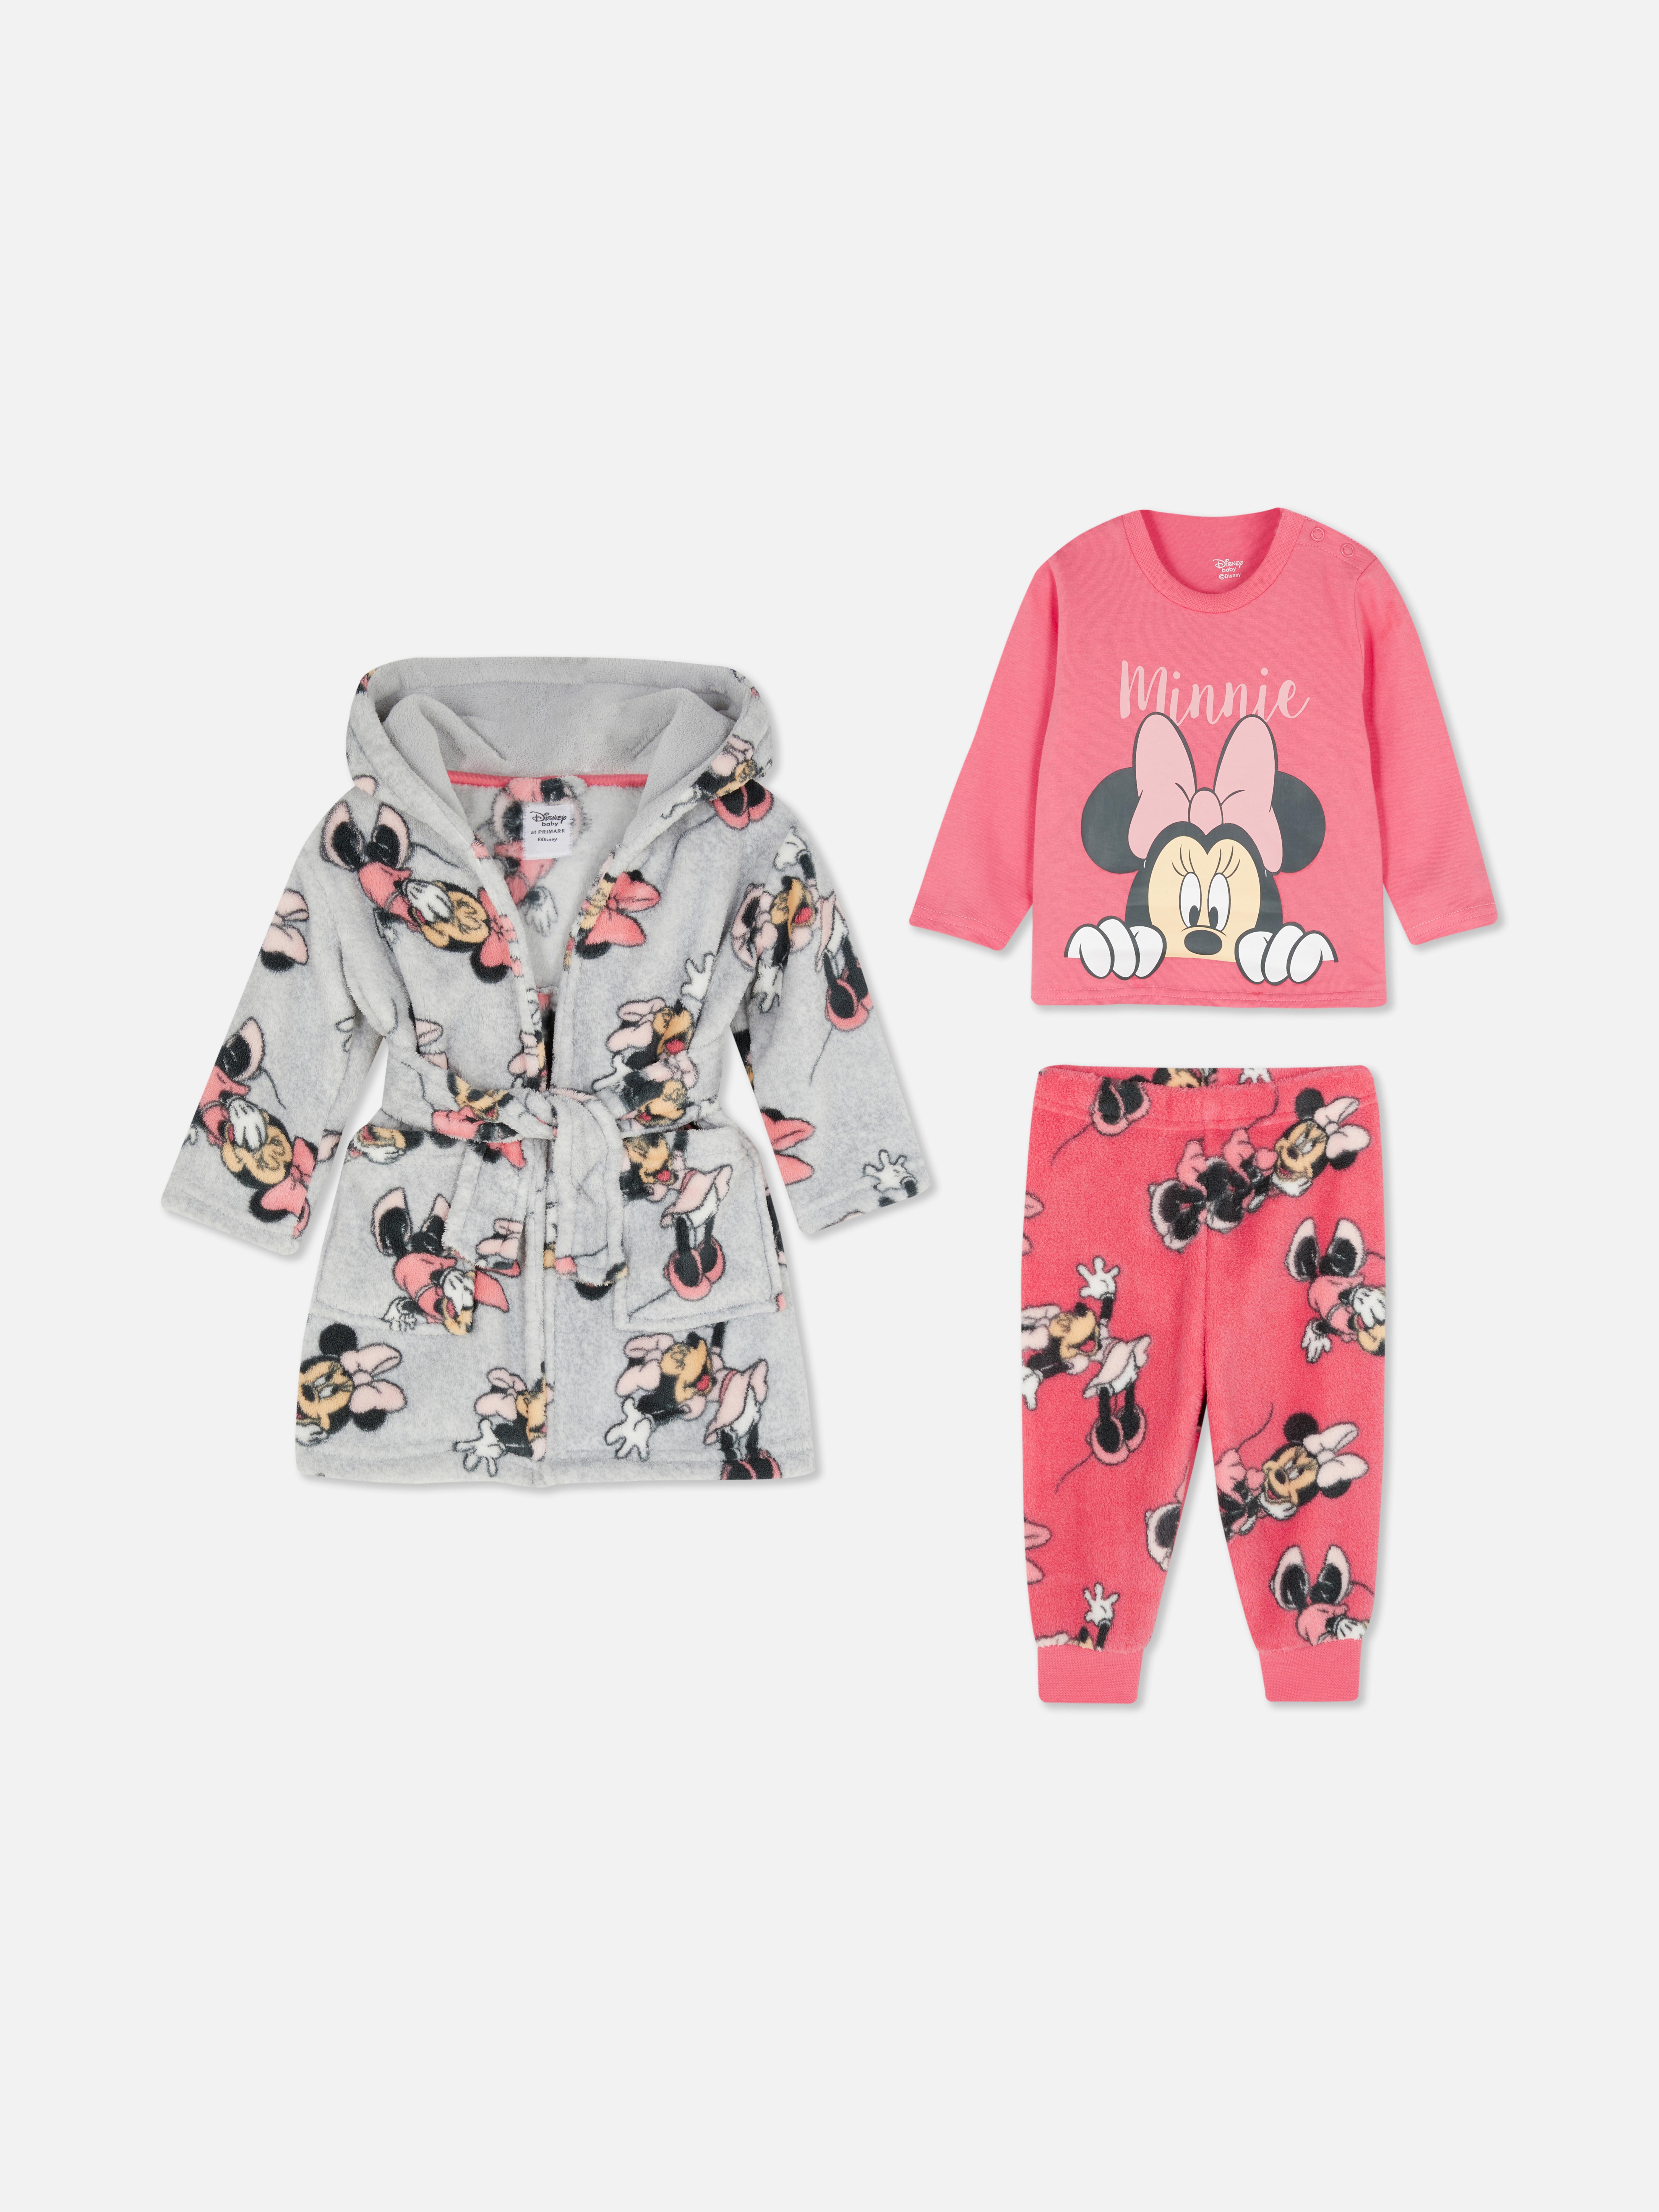 Disney's Minnie Mouse Dressing Gown and Nightwear Set